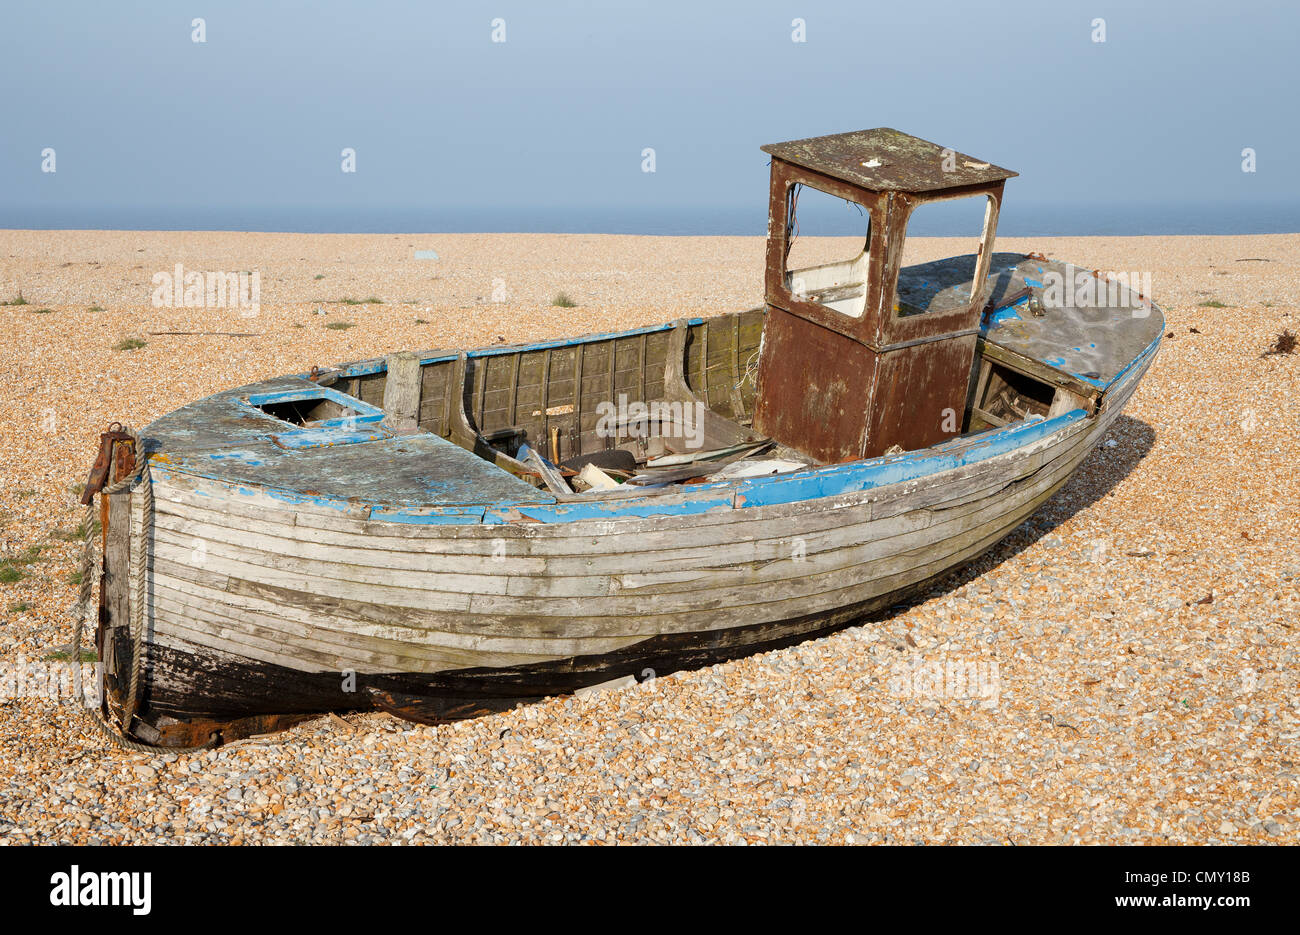 Old wooden fishing boat in bad condition after years of ...